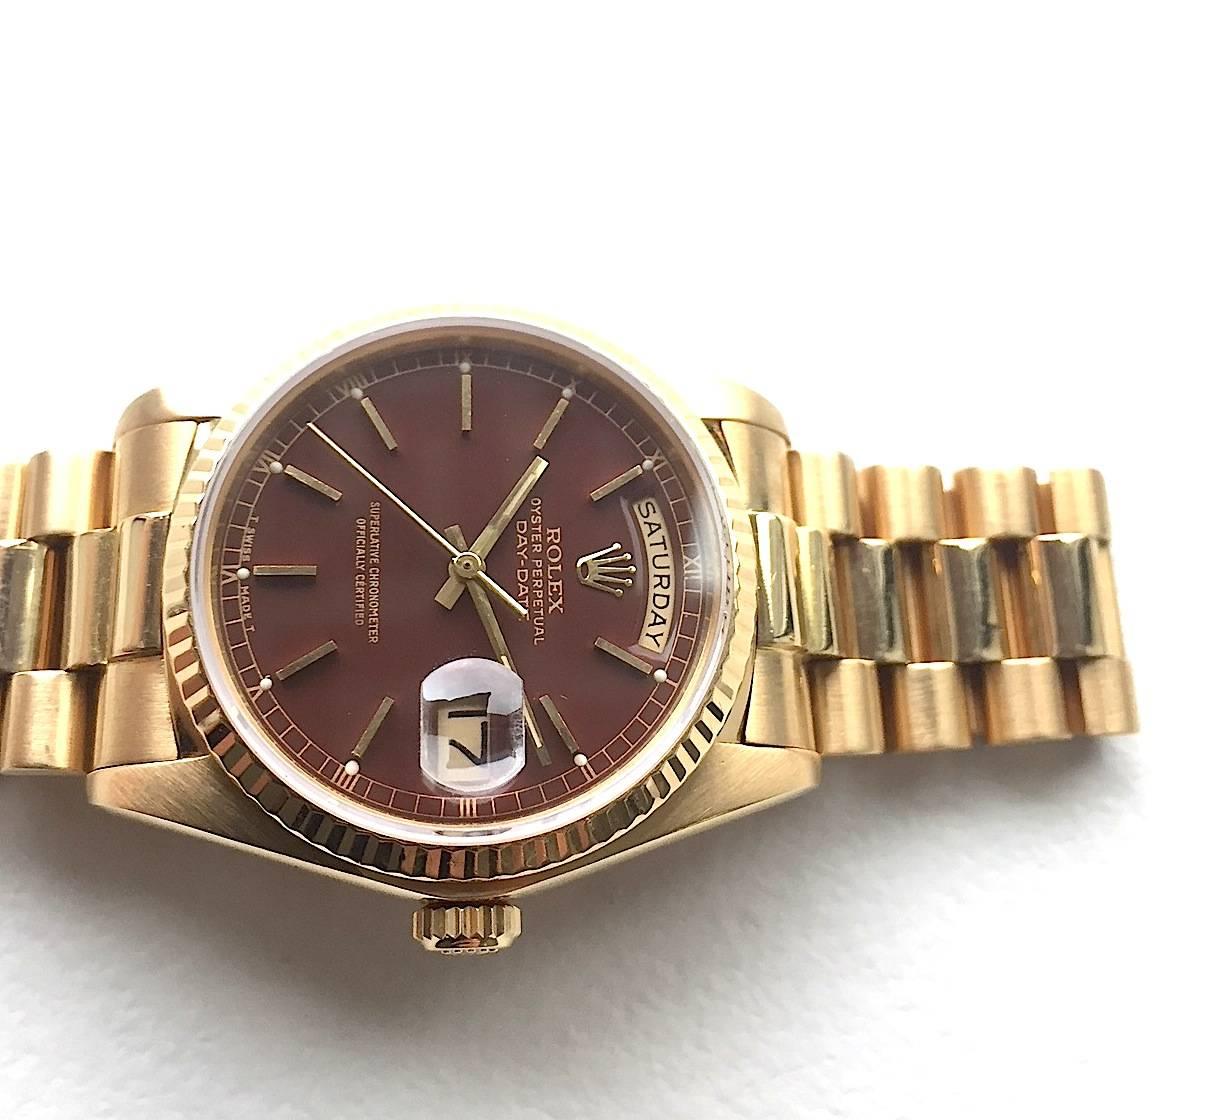 Rare and Pristine Rolex 18K Yellow Gold Day-Date Presidential Watch with Factory Maroon/Oxblood Stella Dial
Beautiful Factory Oxblood Red Dial with Minute Track and Applied Gold Hour Markers
Yellow Gold Gold Fluted Bezel
18K Yellow Gold Case
36mm in